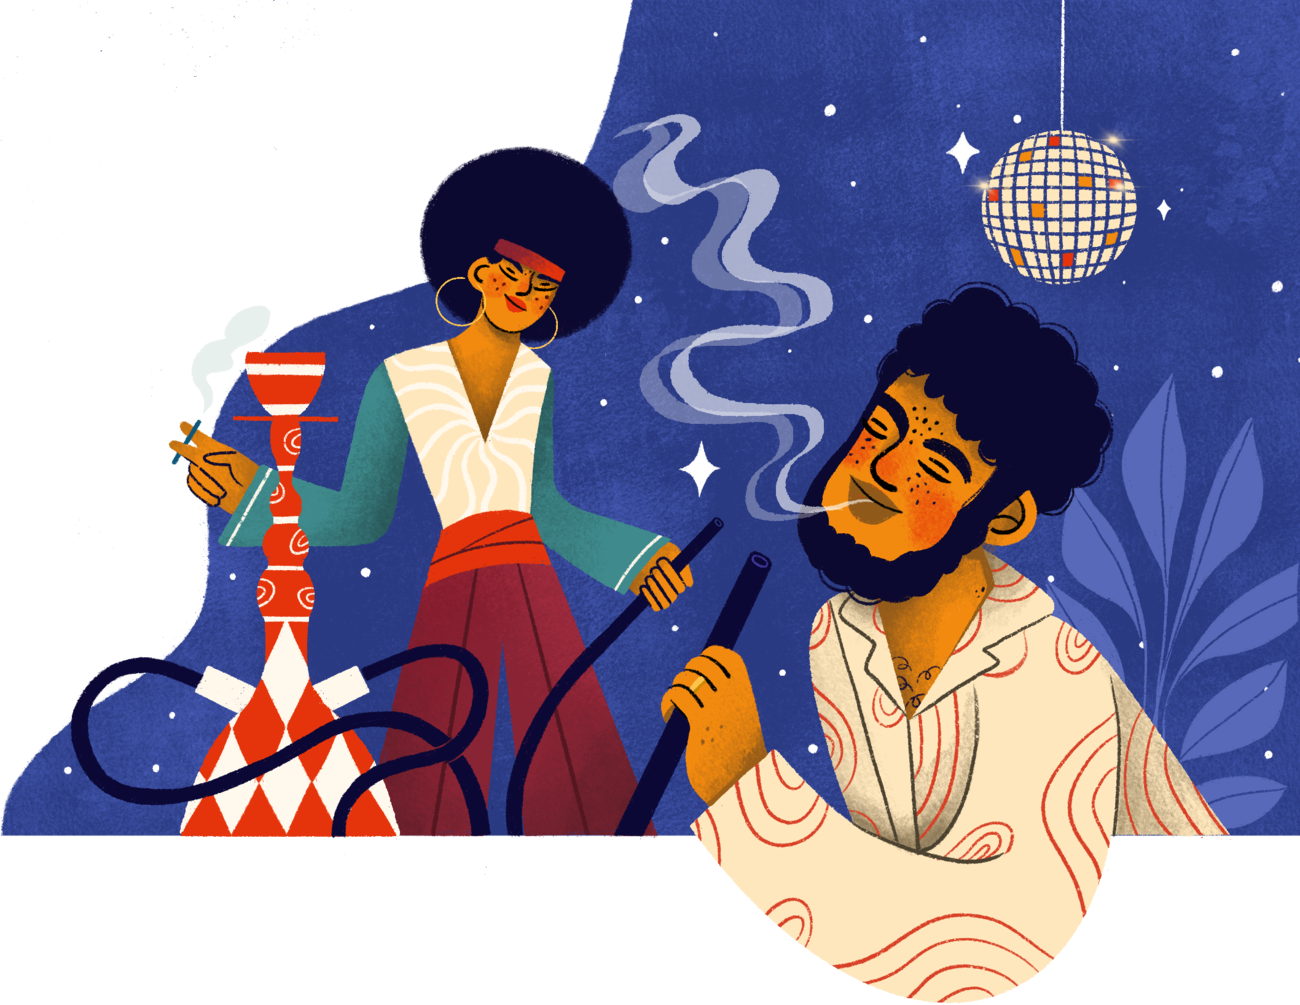 A couple in a 70s outfit smoking hookah on a fun night.